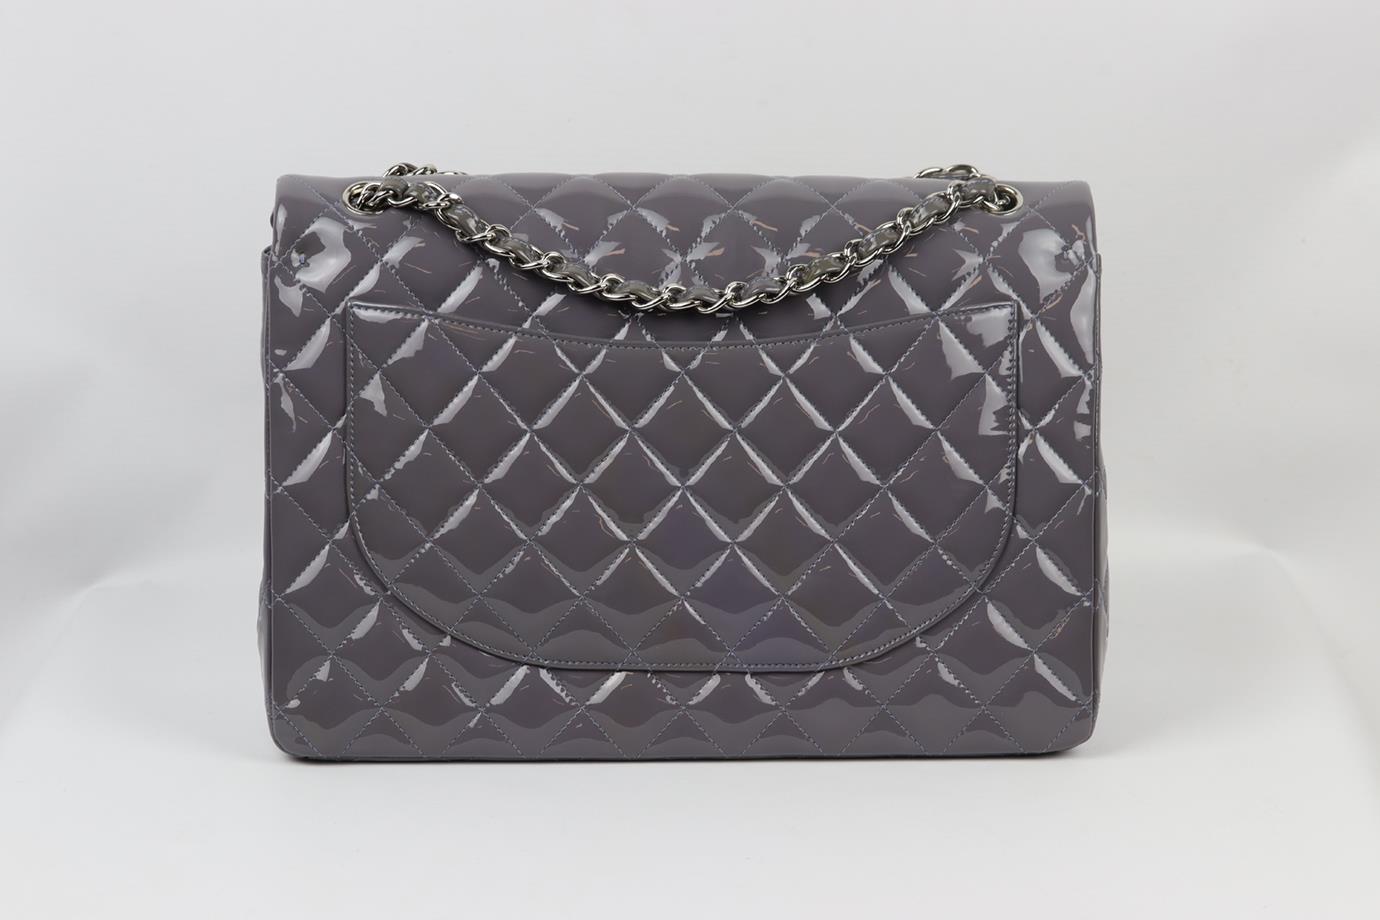 Chanel 2012 Maxi Classic Quilted Patent Leather Double Flap Shoulder Bag In Excellent Condition For Sale In London, GB